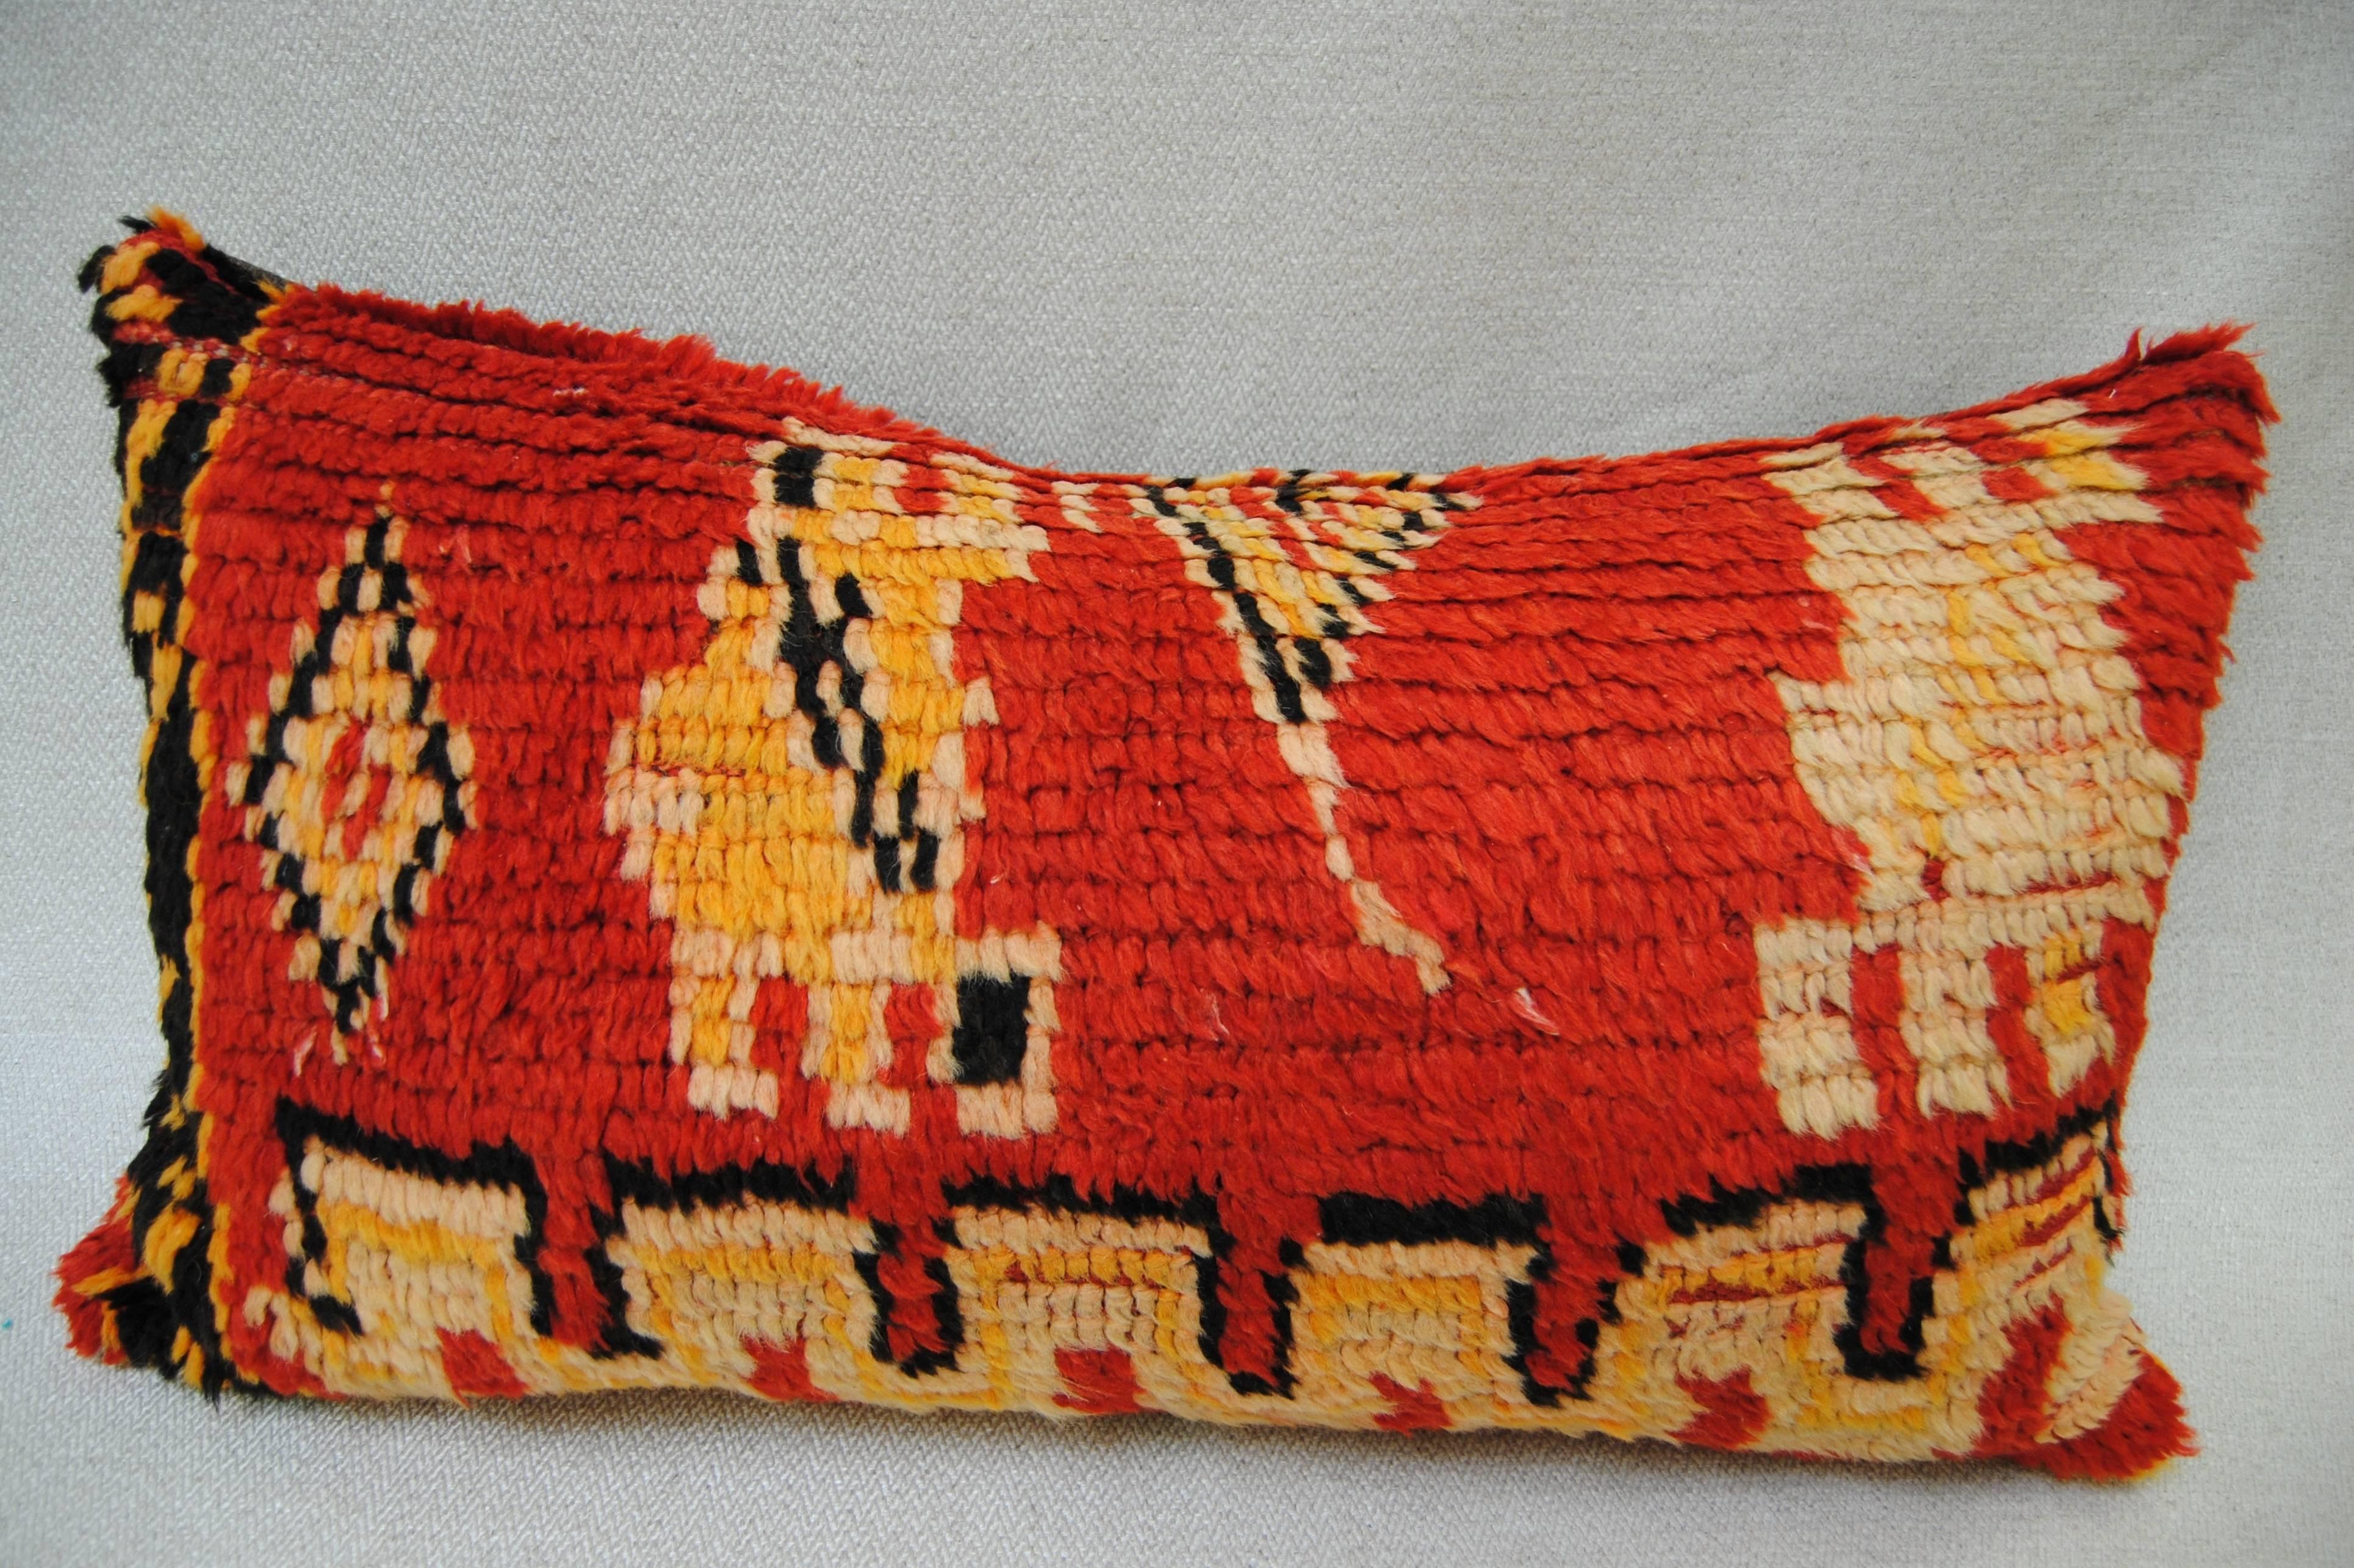 Custom pillow cut from a vintage hand-loomed wool Moroccan Berber rug. The rug is from Rhamna and over 65 years old. Strong tribal designs with vibrant color and a soft, lustrous hand. The pillow is backed in a dark brown linen, filled with an